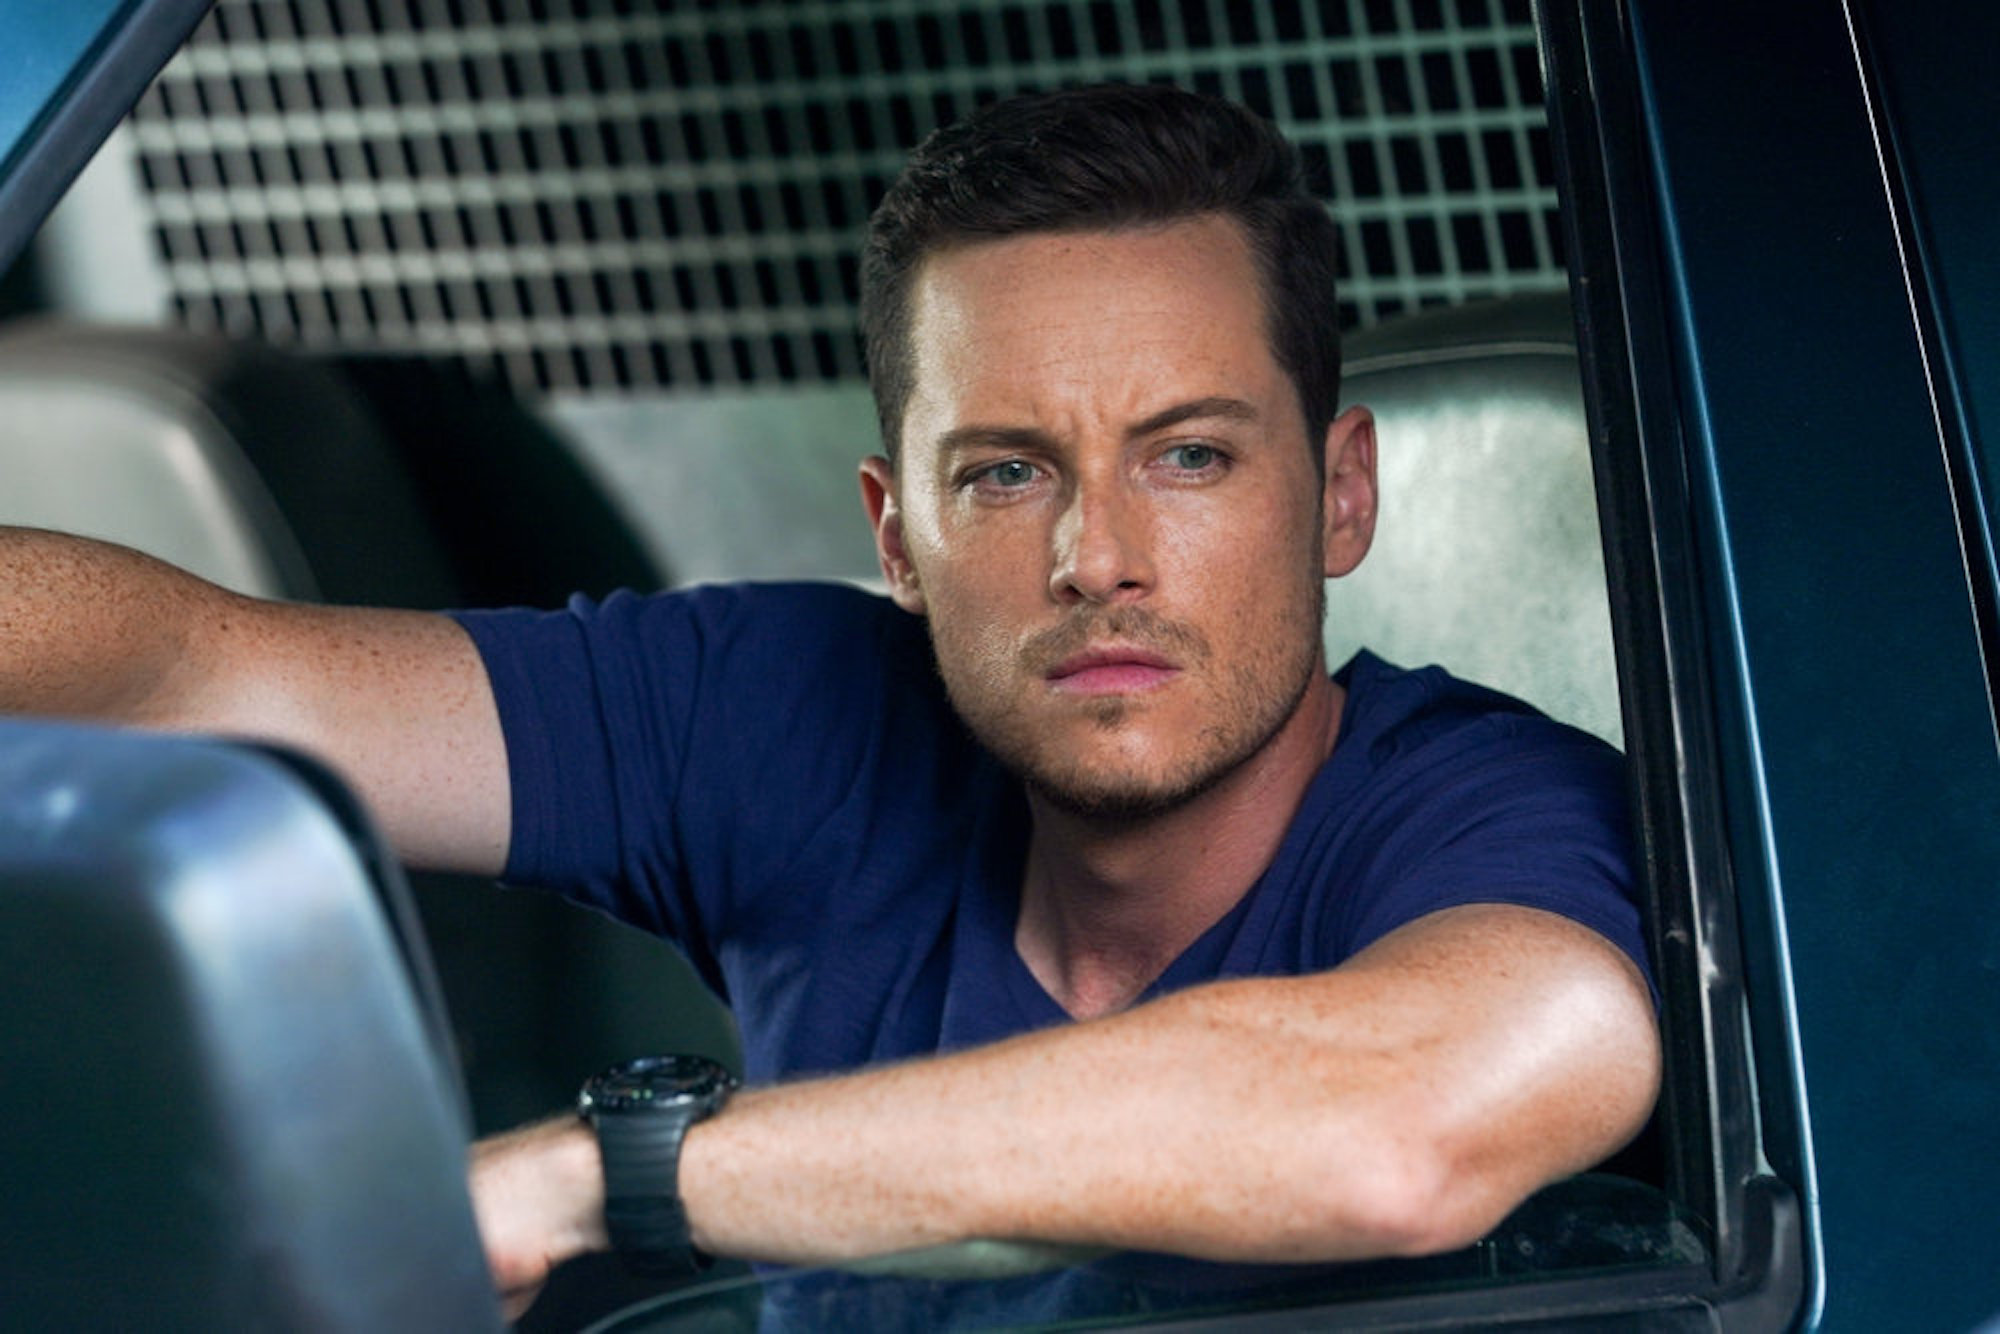 Jay Halstead sitting in a car in 'Chicago P.D.' Season 9